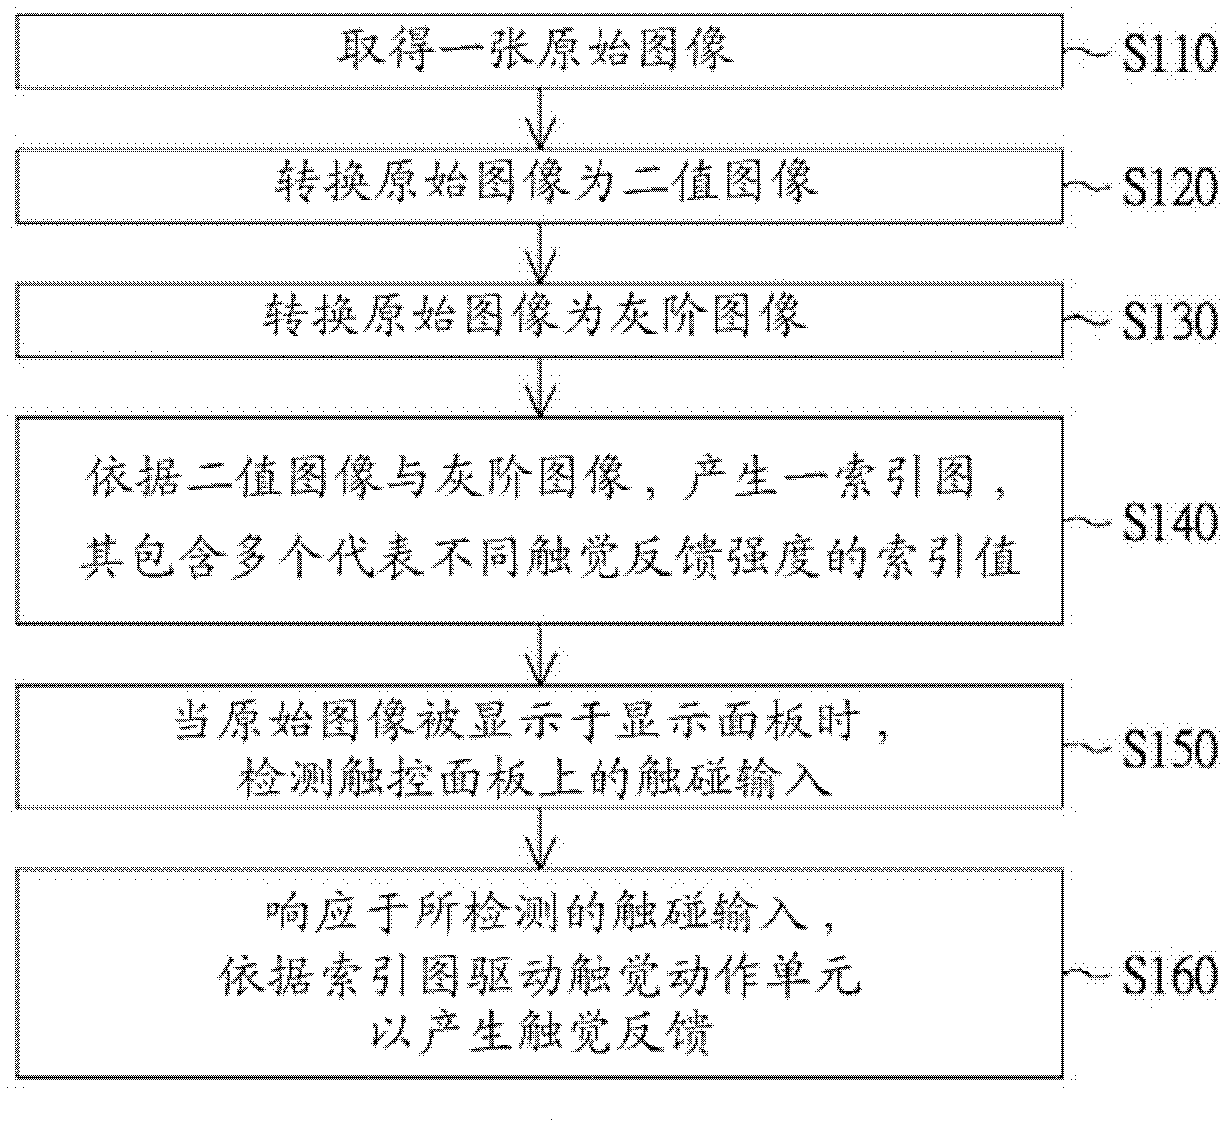 Method and electronic device for tactile feedback